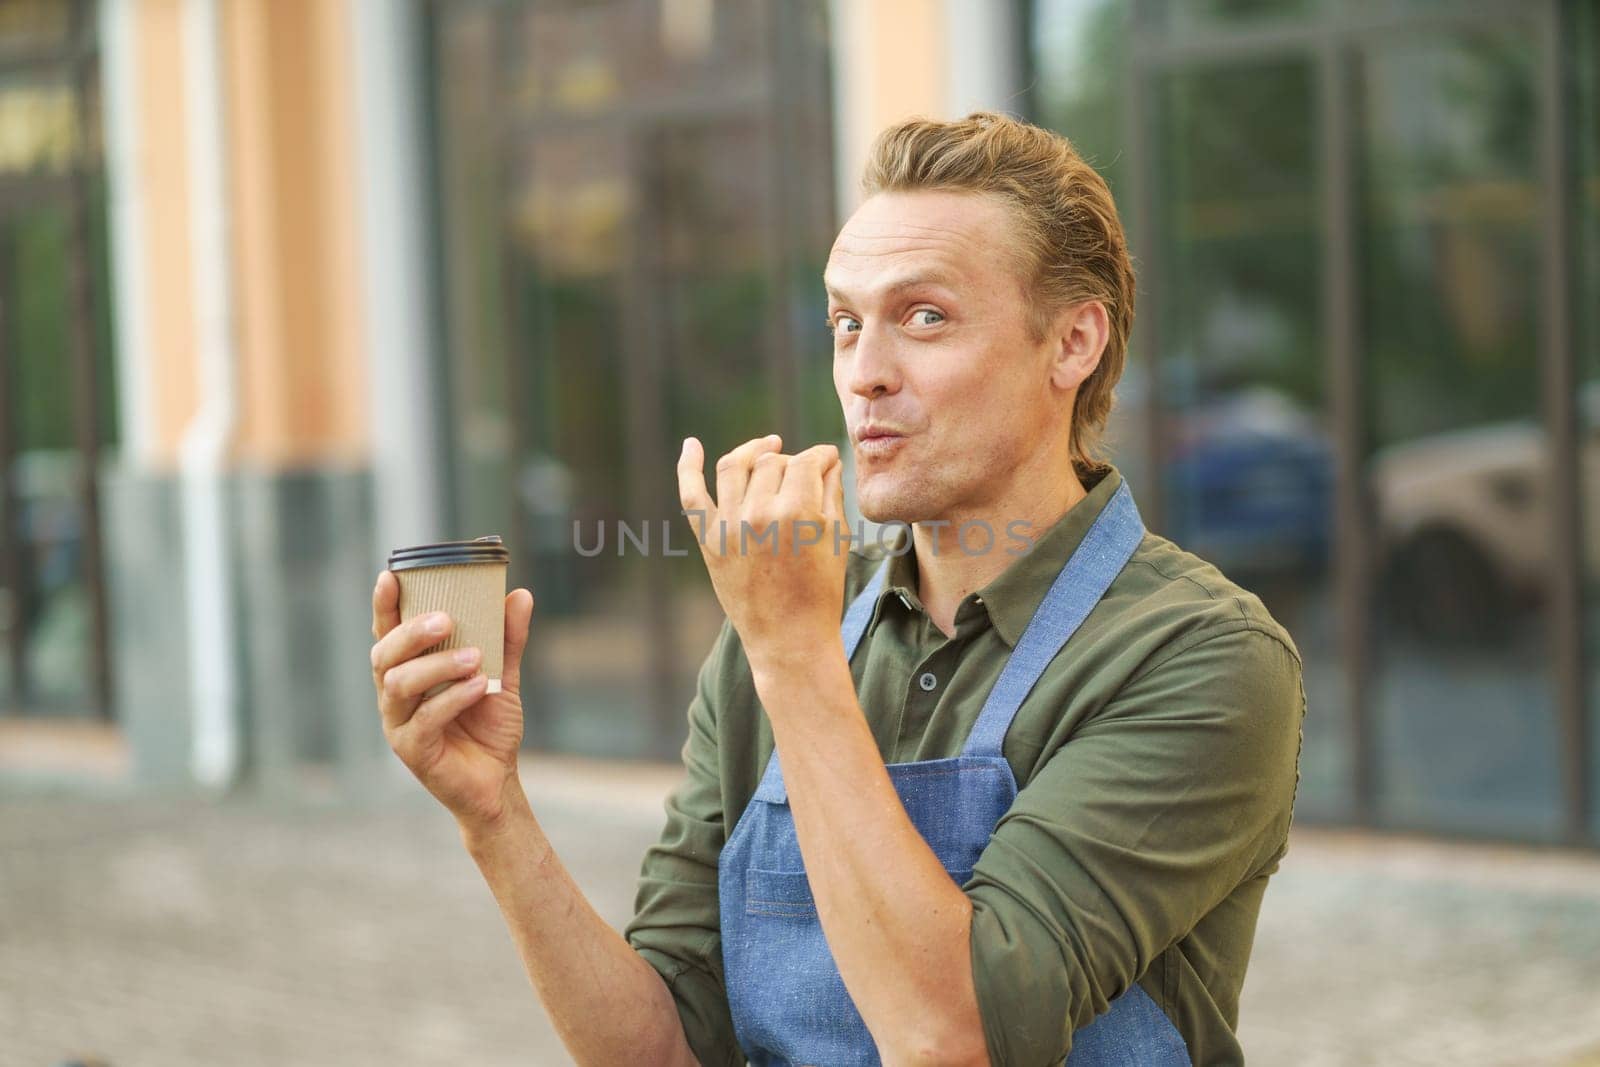 Waiter presenting delicious and tasty cup of coffee in paper cup to-go. With smile on face, waiter highlights tempting aroma and flavor of coffee, enticing viewer to indulge in delightful beverage. High quality photo